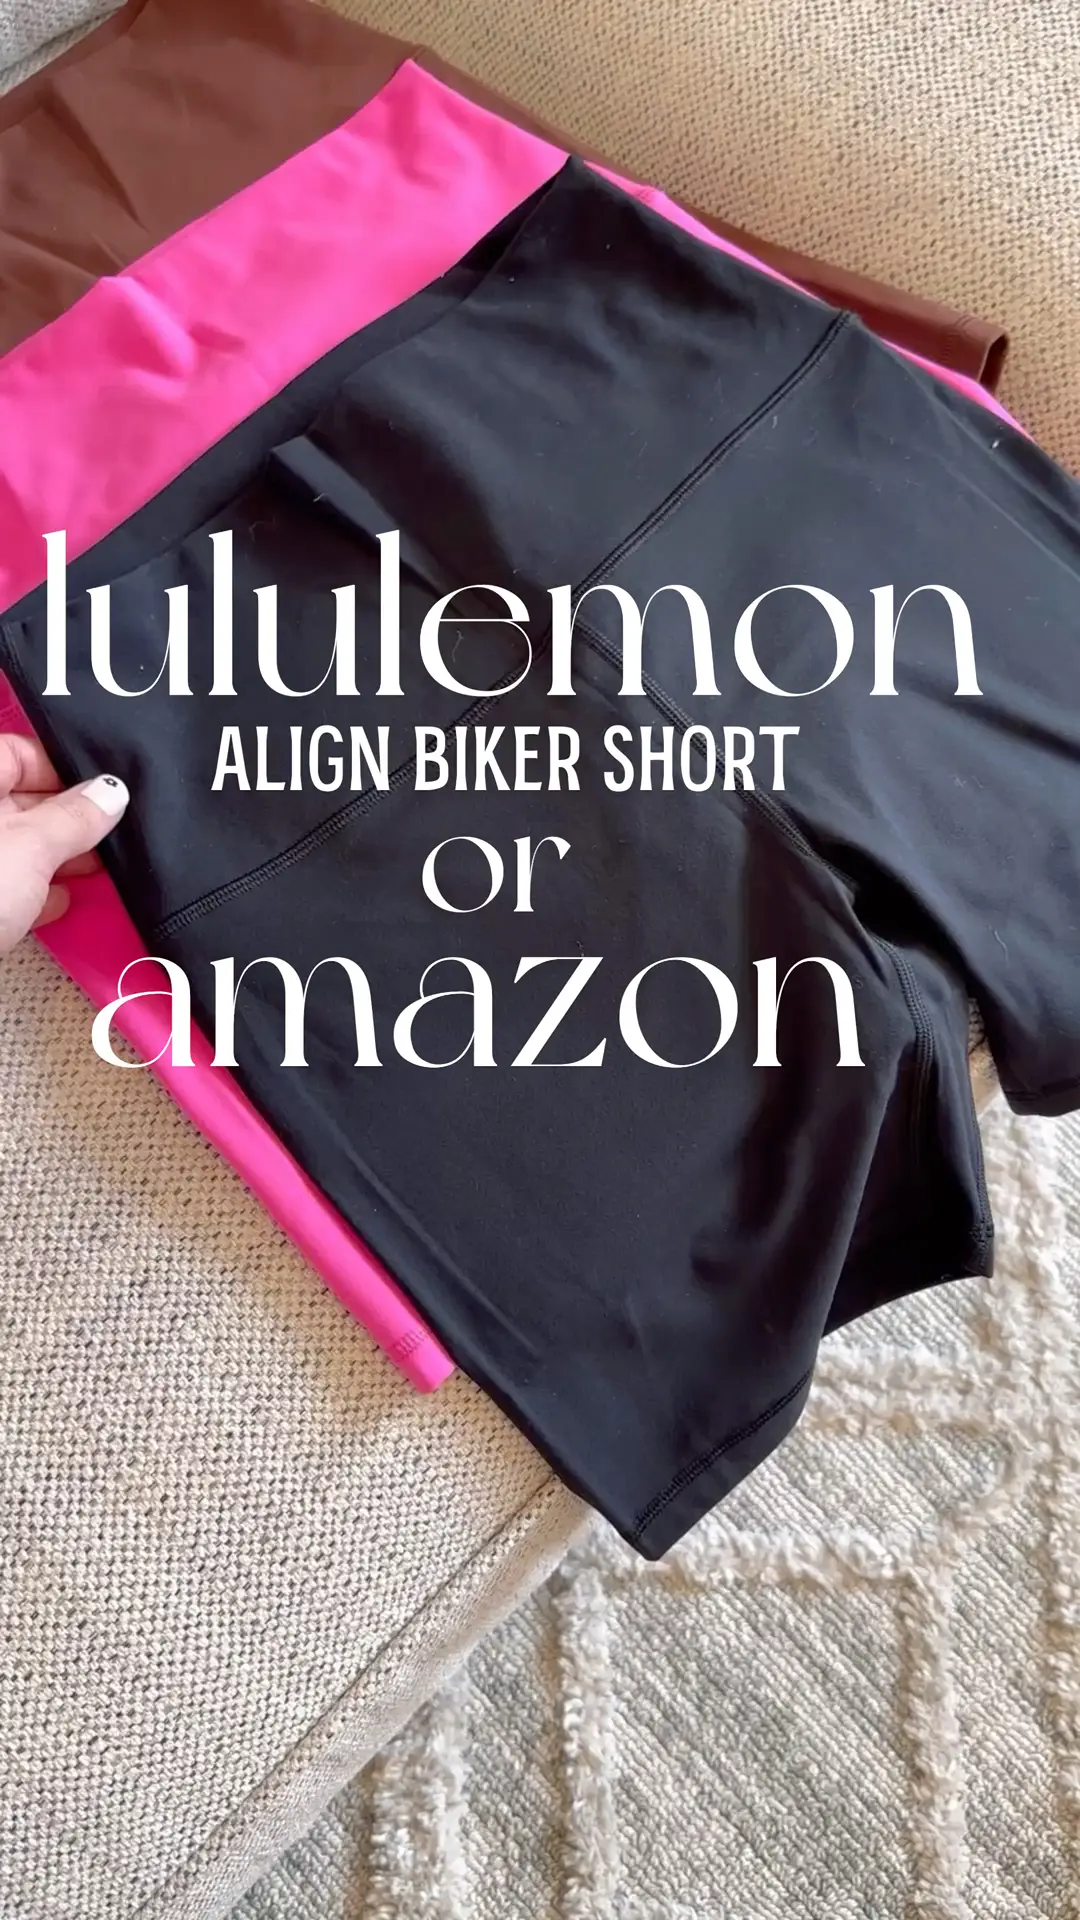 Lululemon lookalike biker shorts from , Video published by chloee